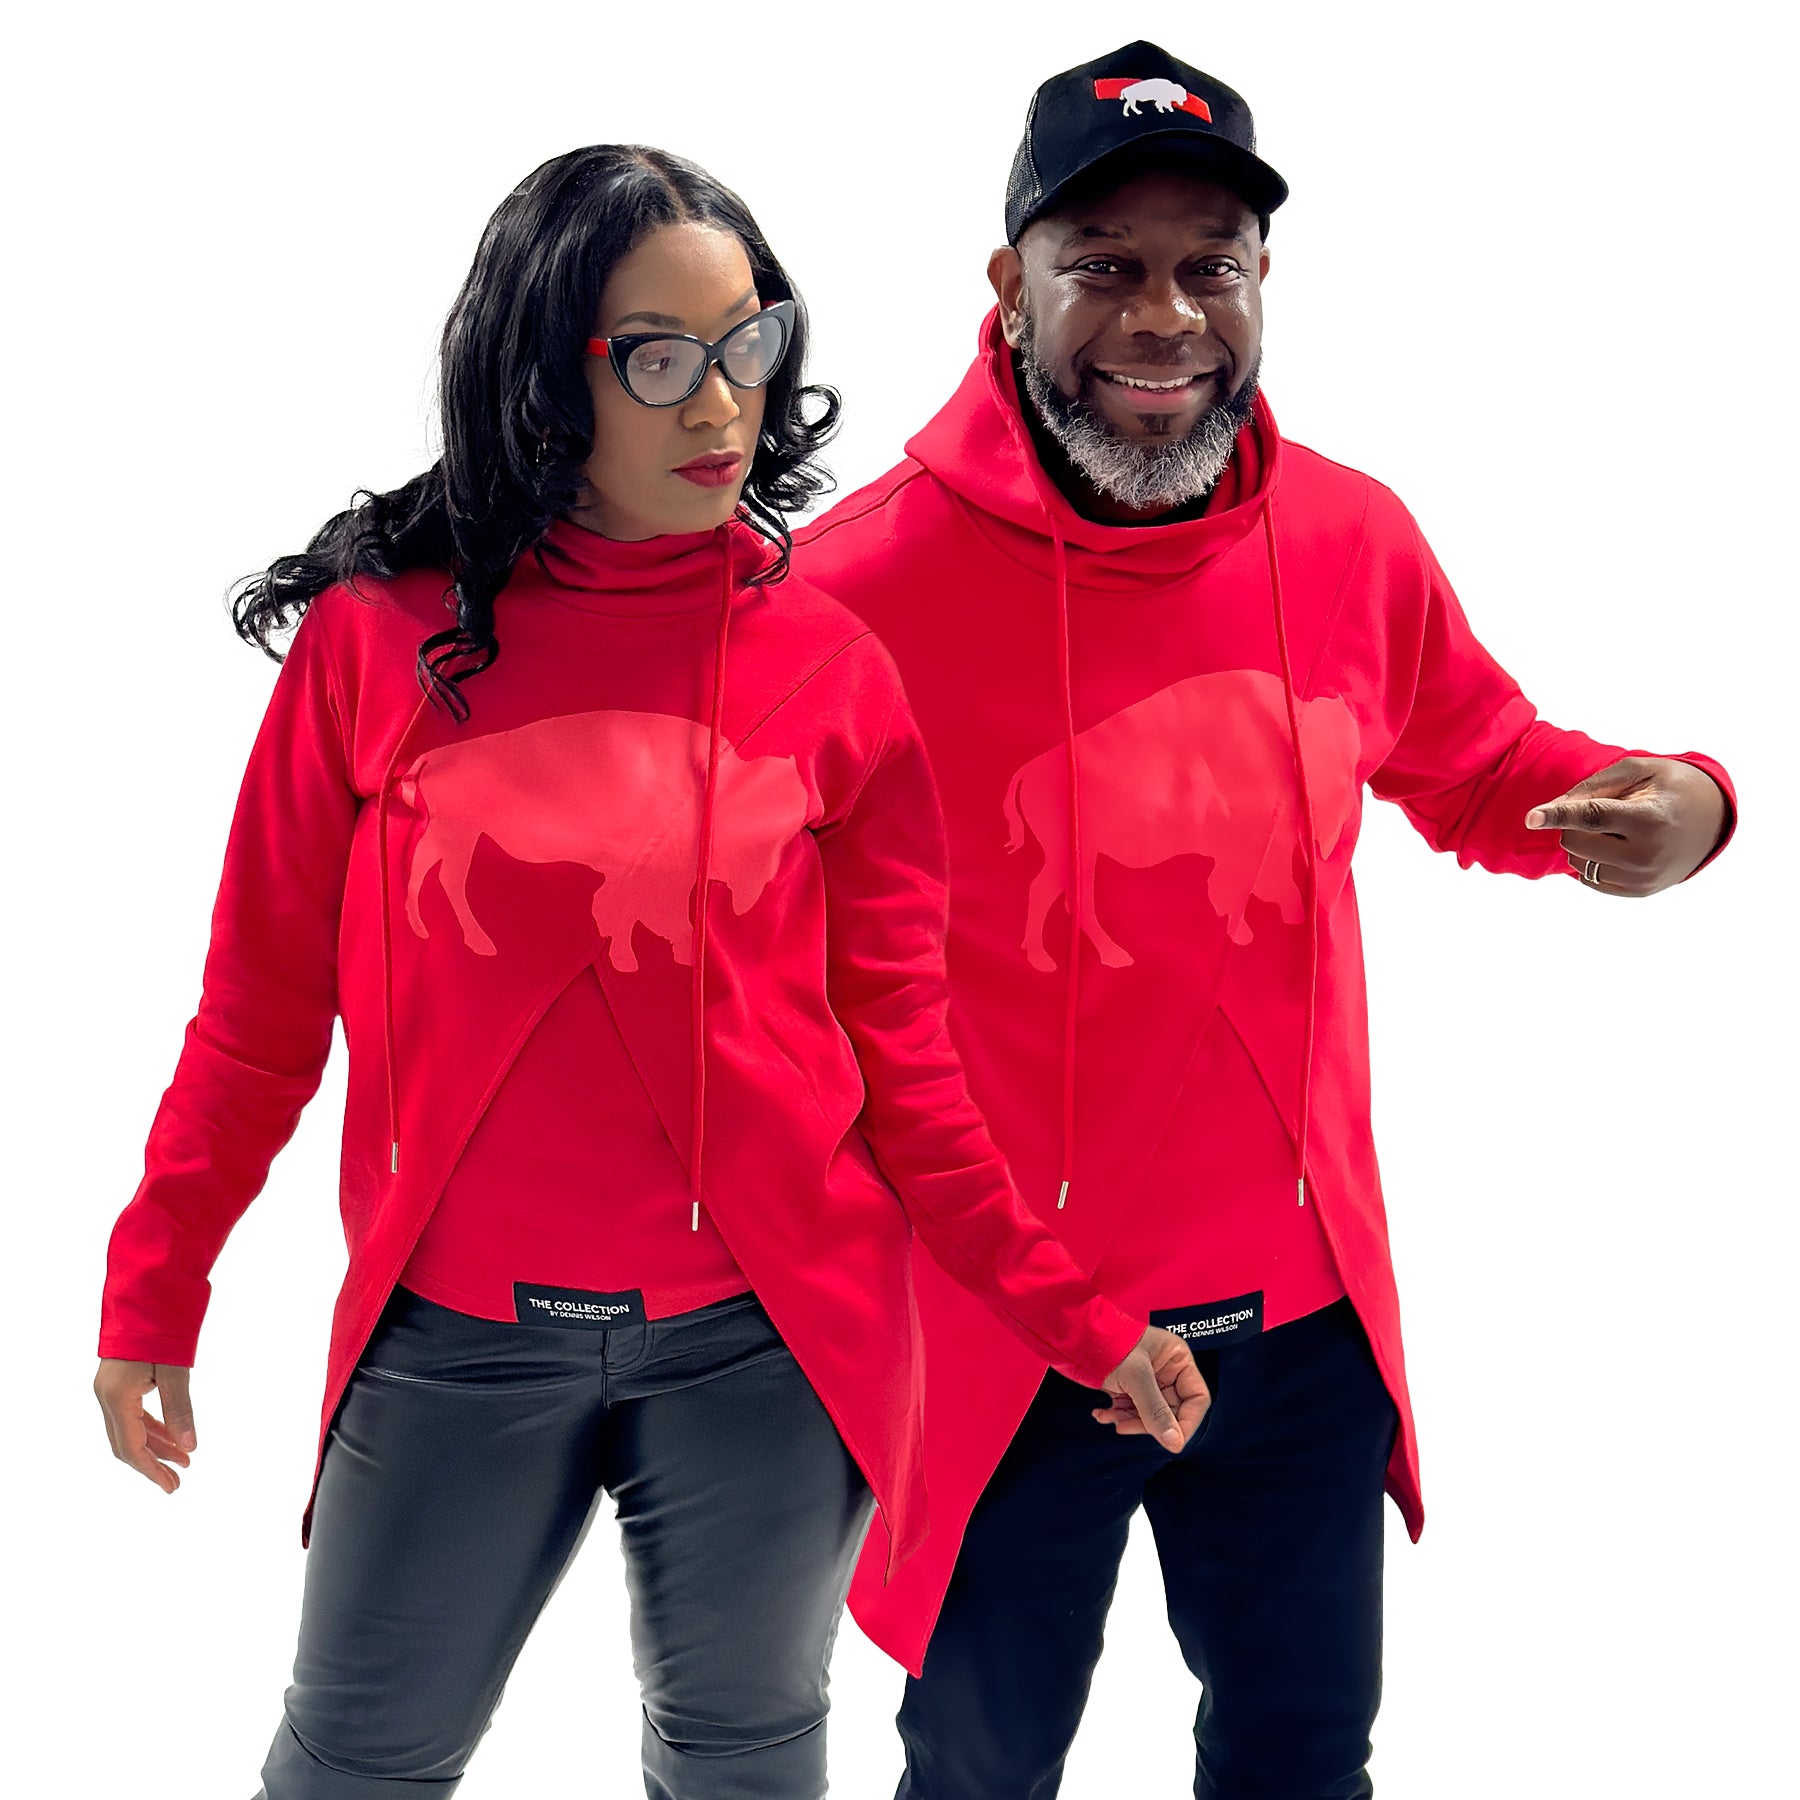 Crossover Red Bflo Hoodie